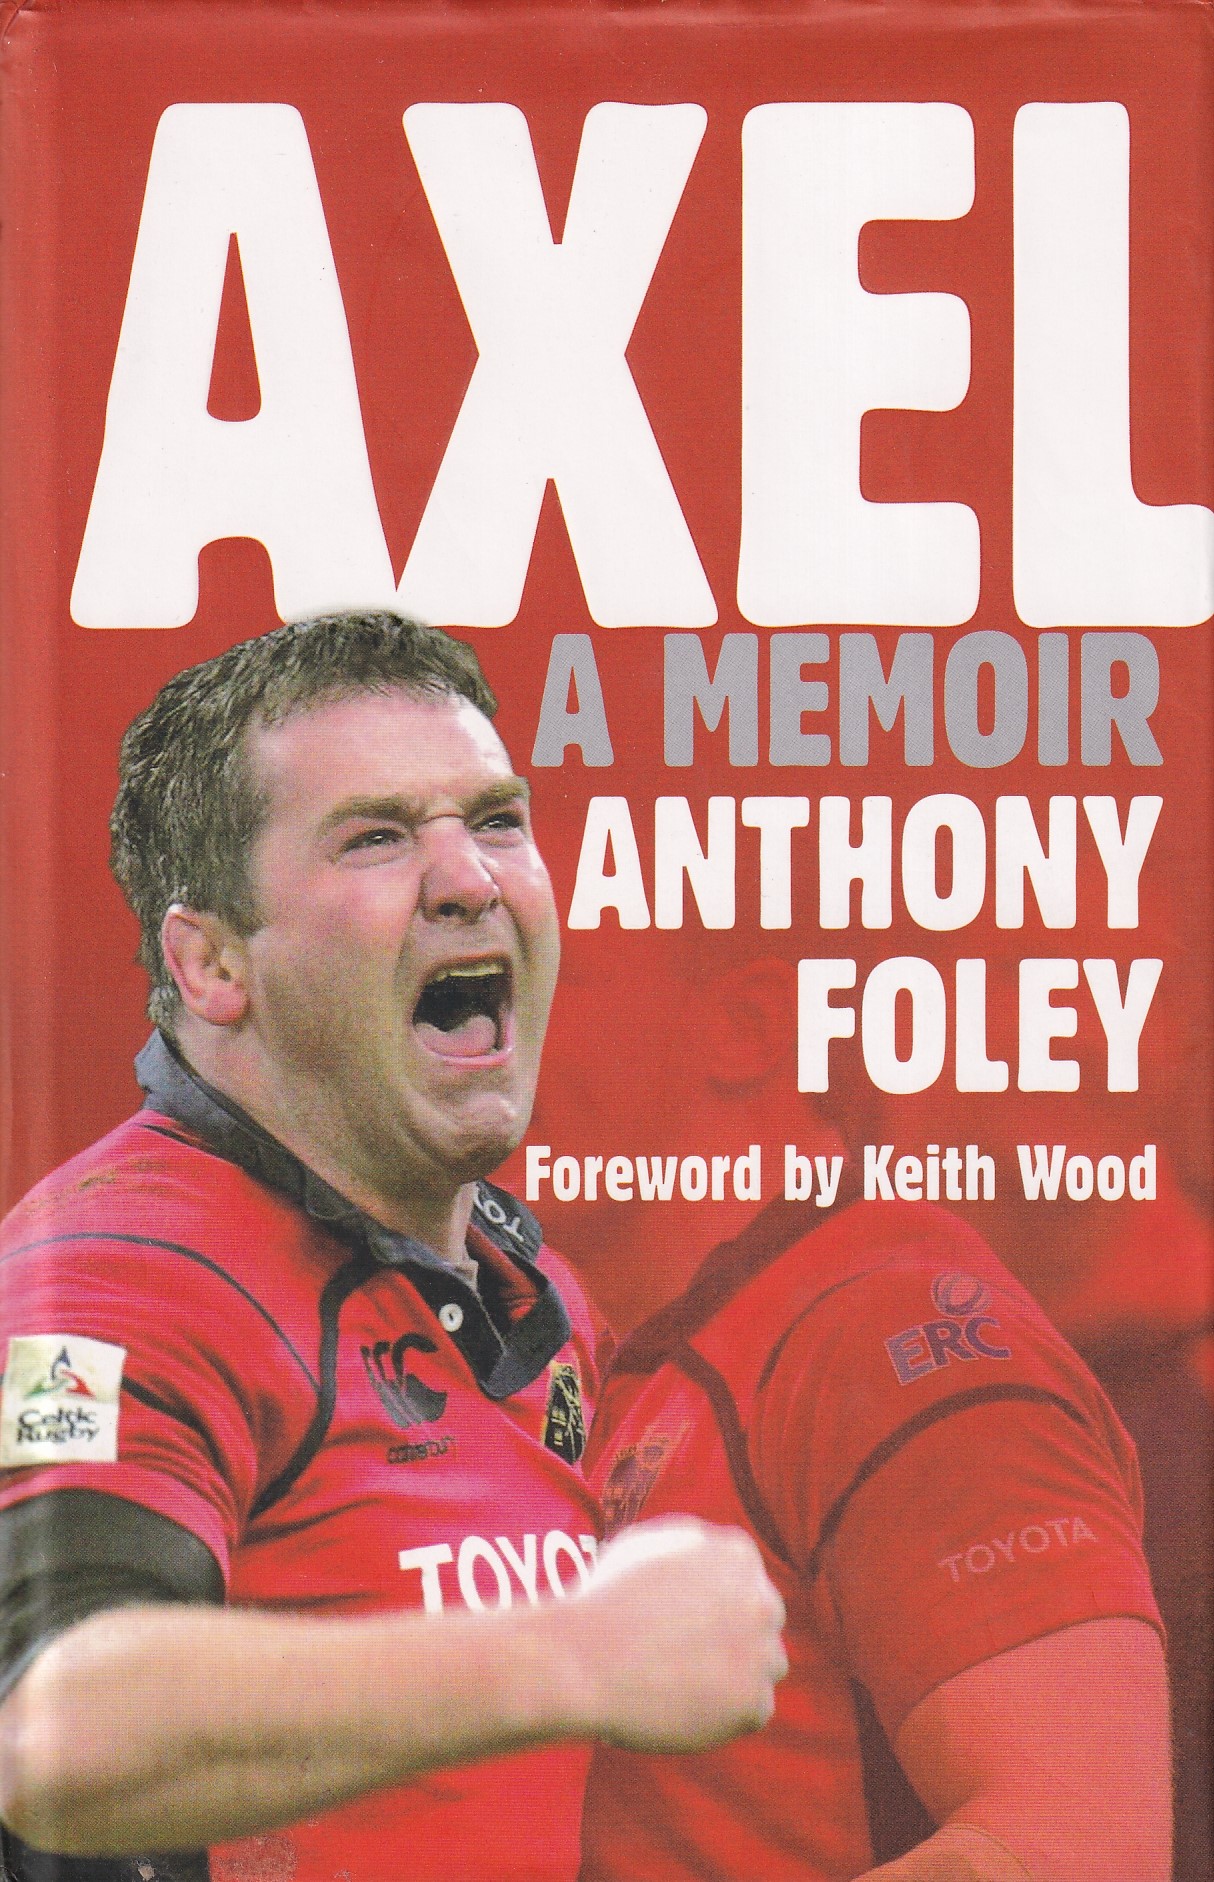 Axel: A Memoir [SIGNED] by Anthony Foley